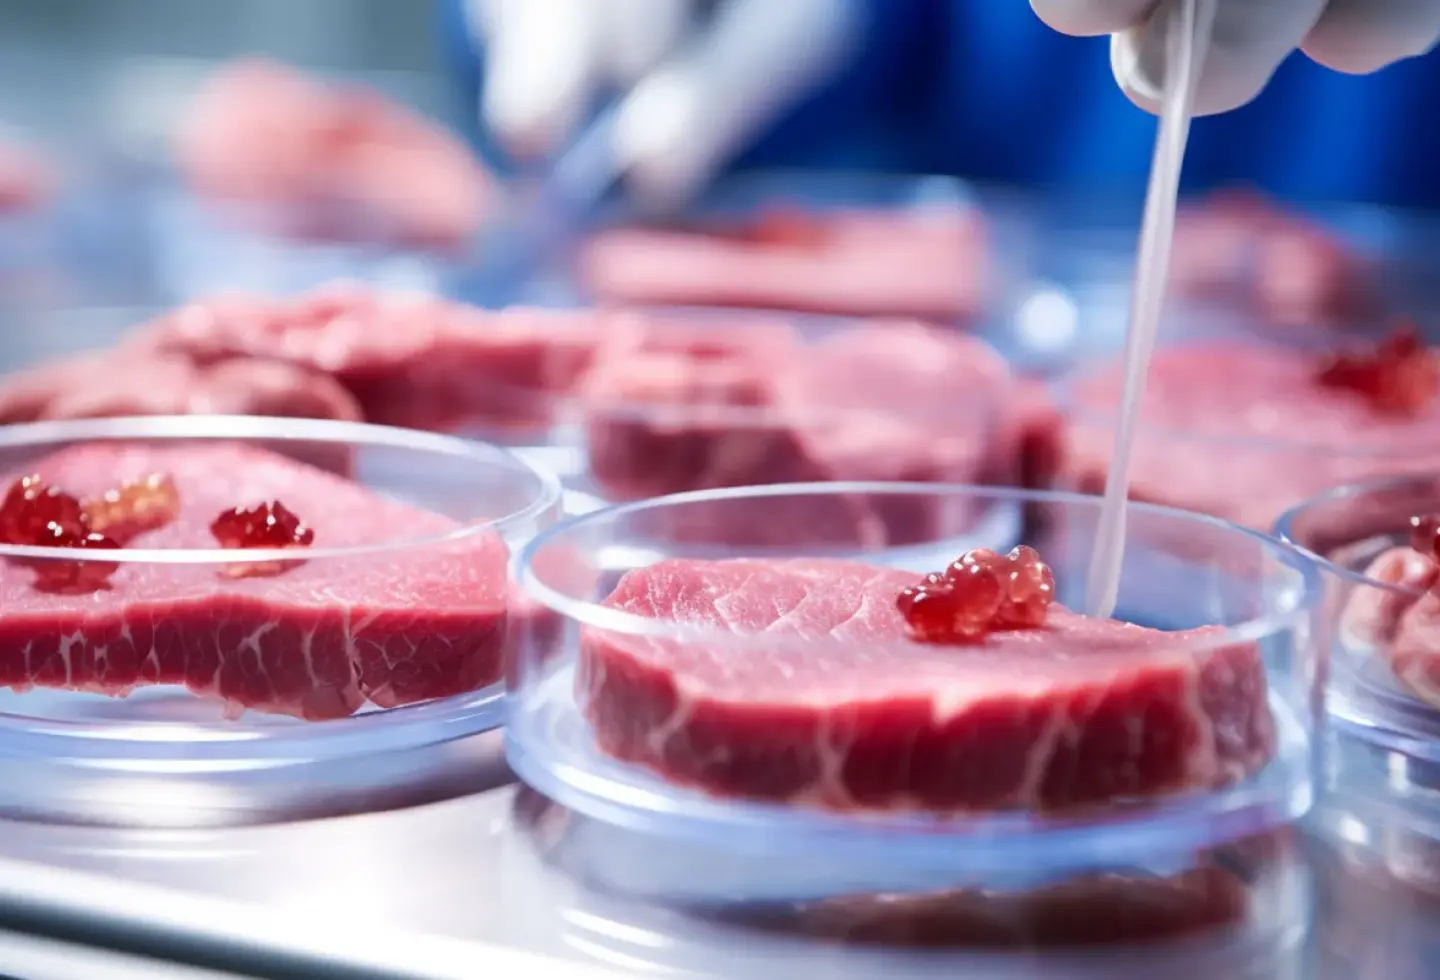 Image : Lab-grown meat companies revolutionizing the food industry